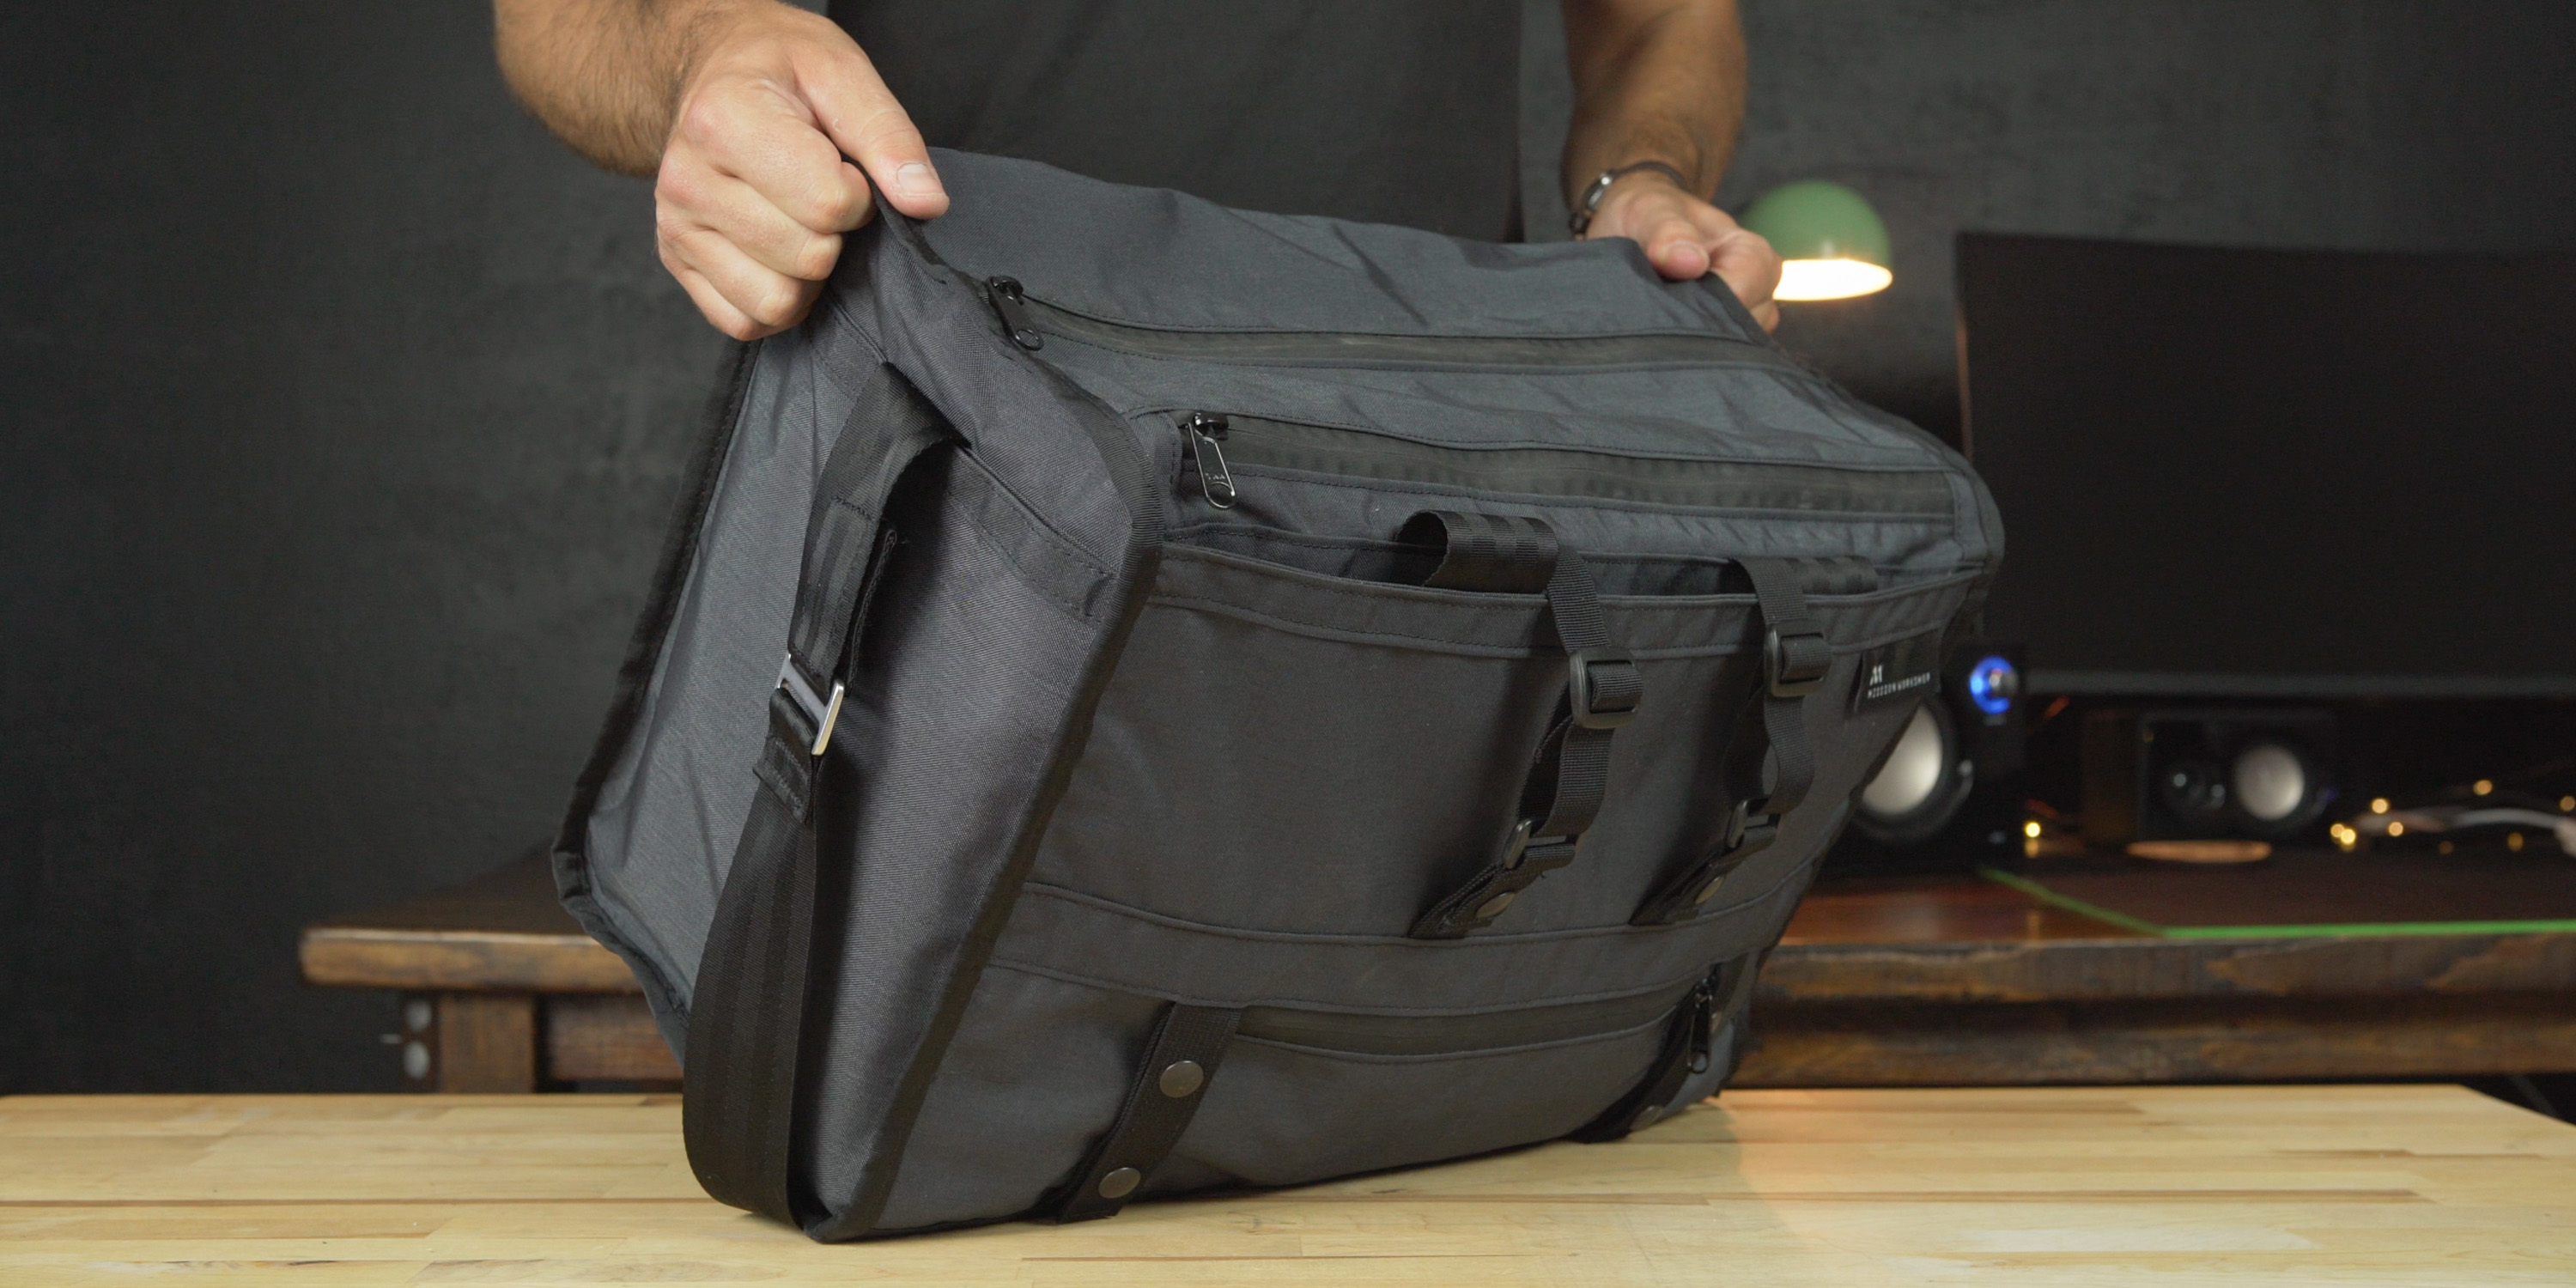 Transit Duffle with handles stored in side pockets